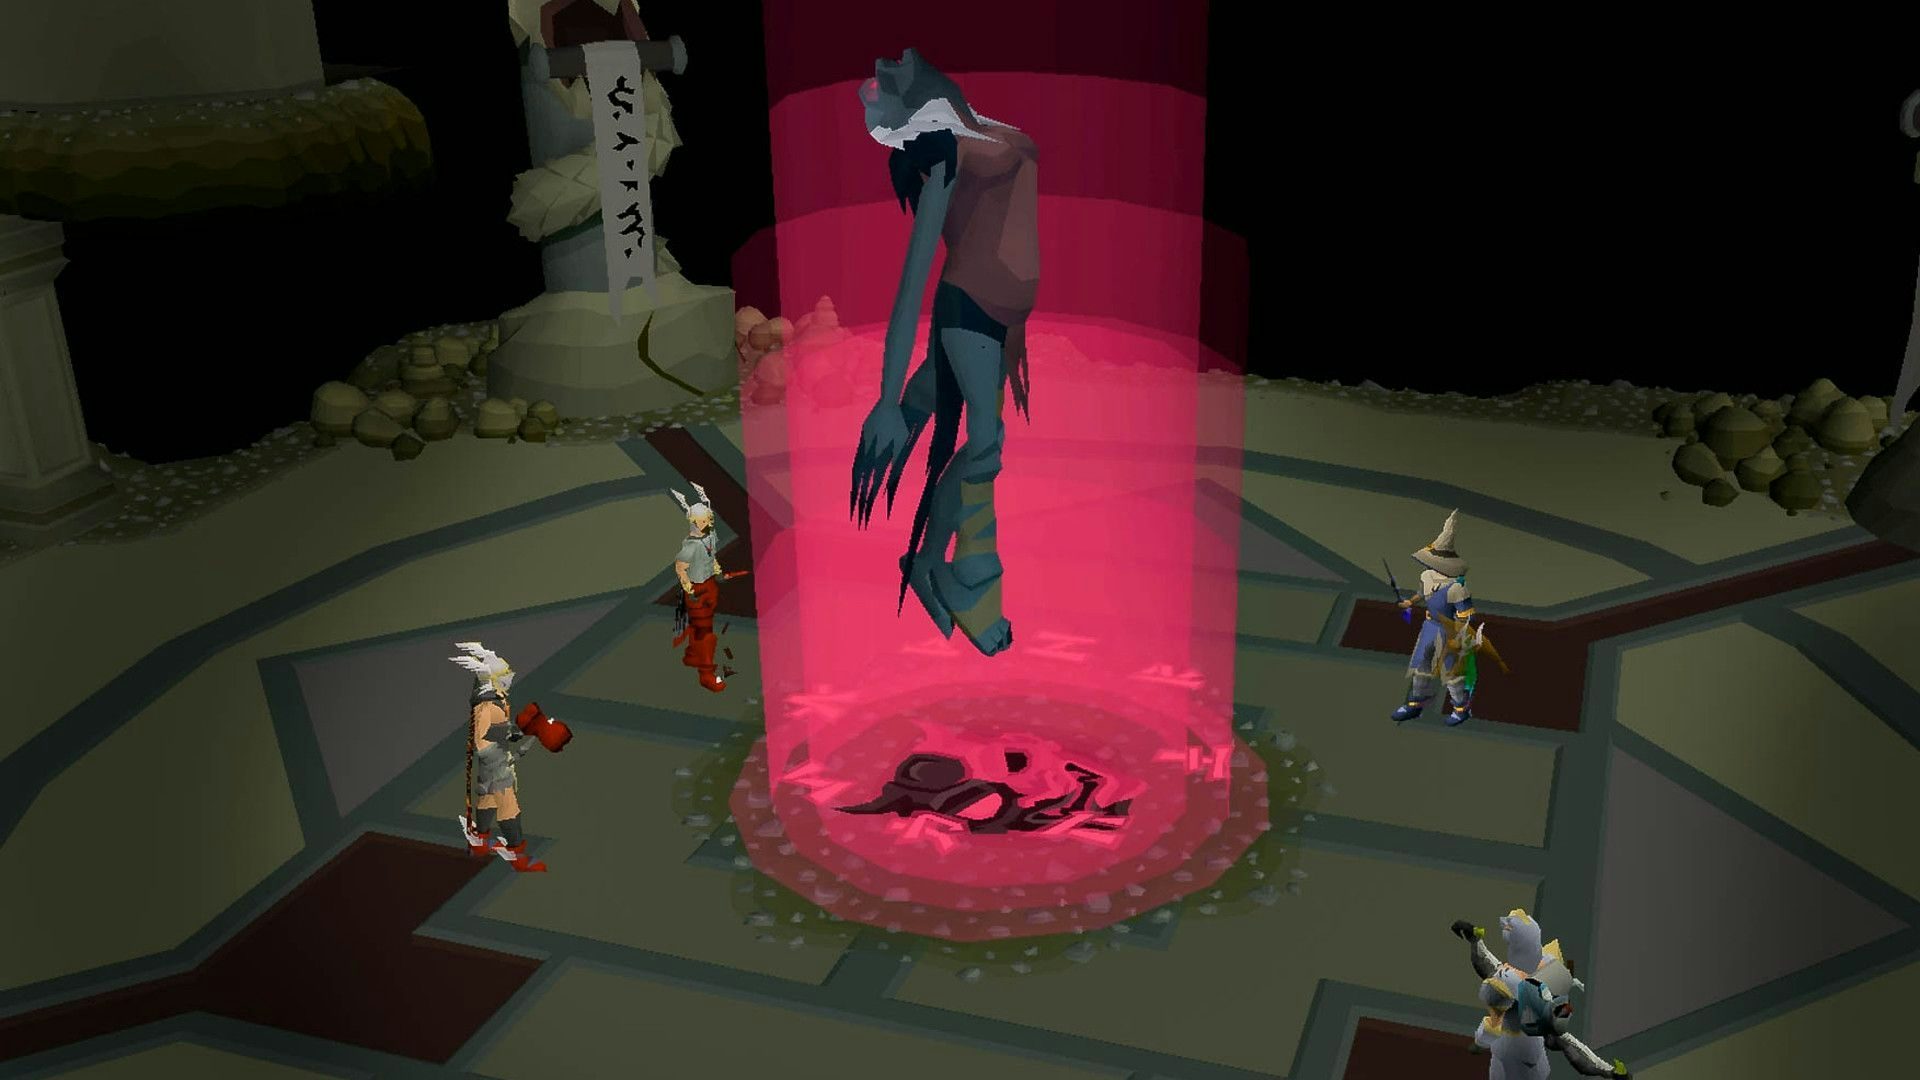 Caption competition! Caption this picture from Old School Runescape for $2